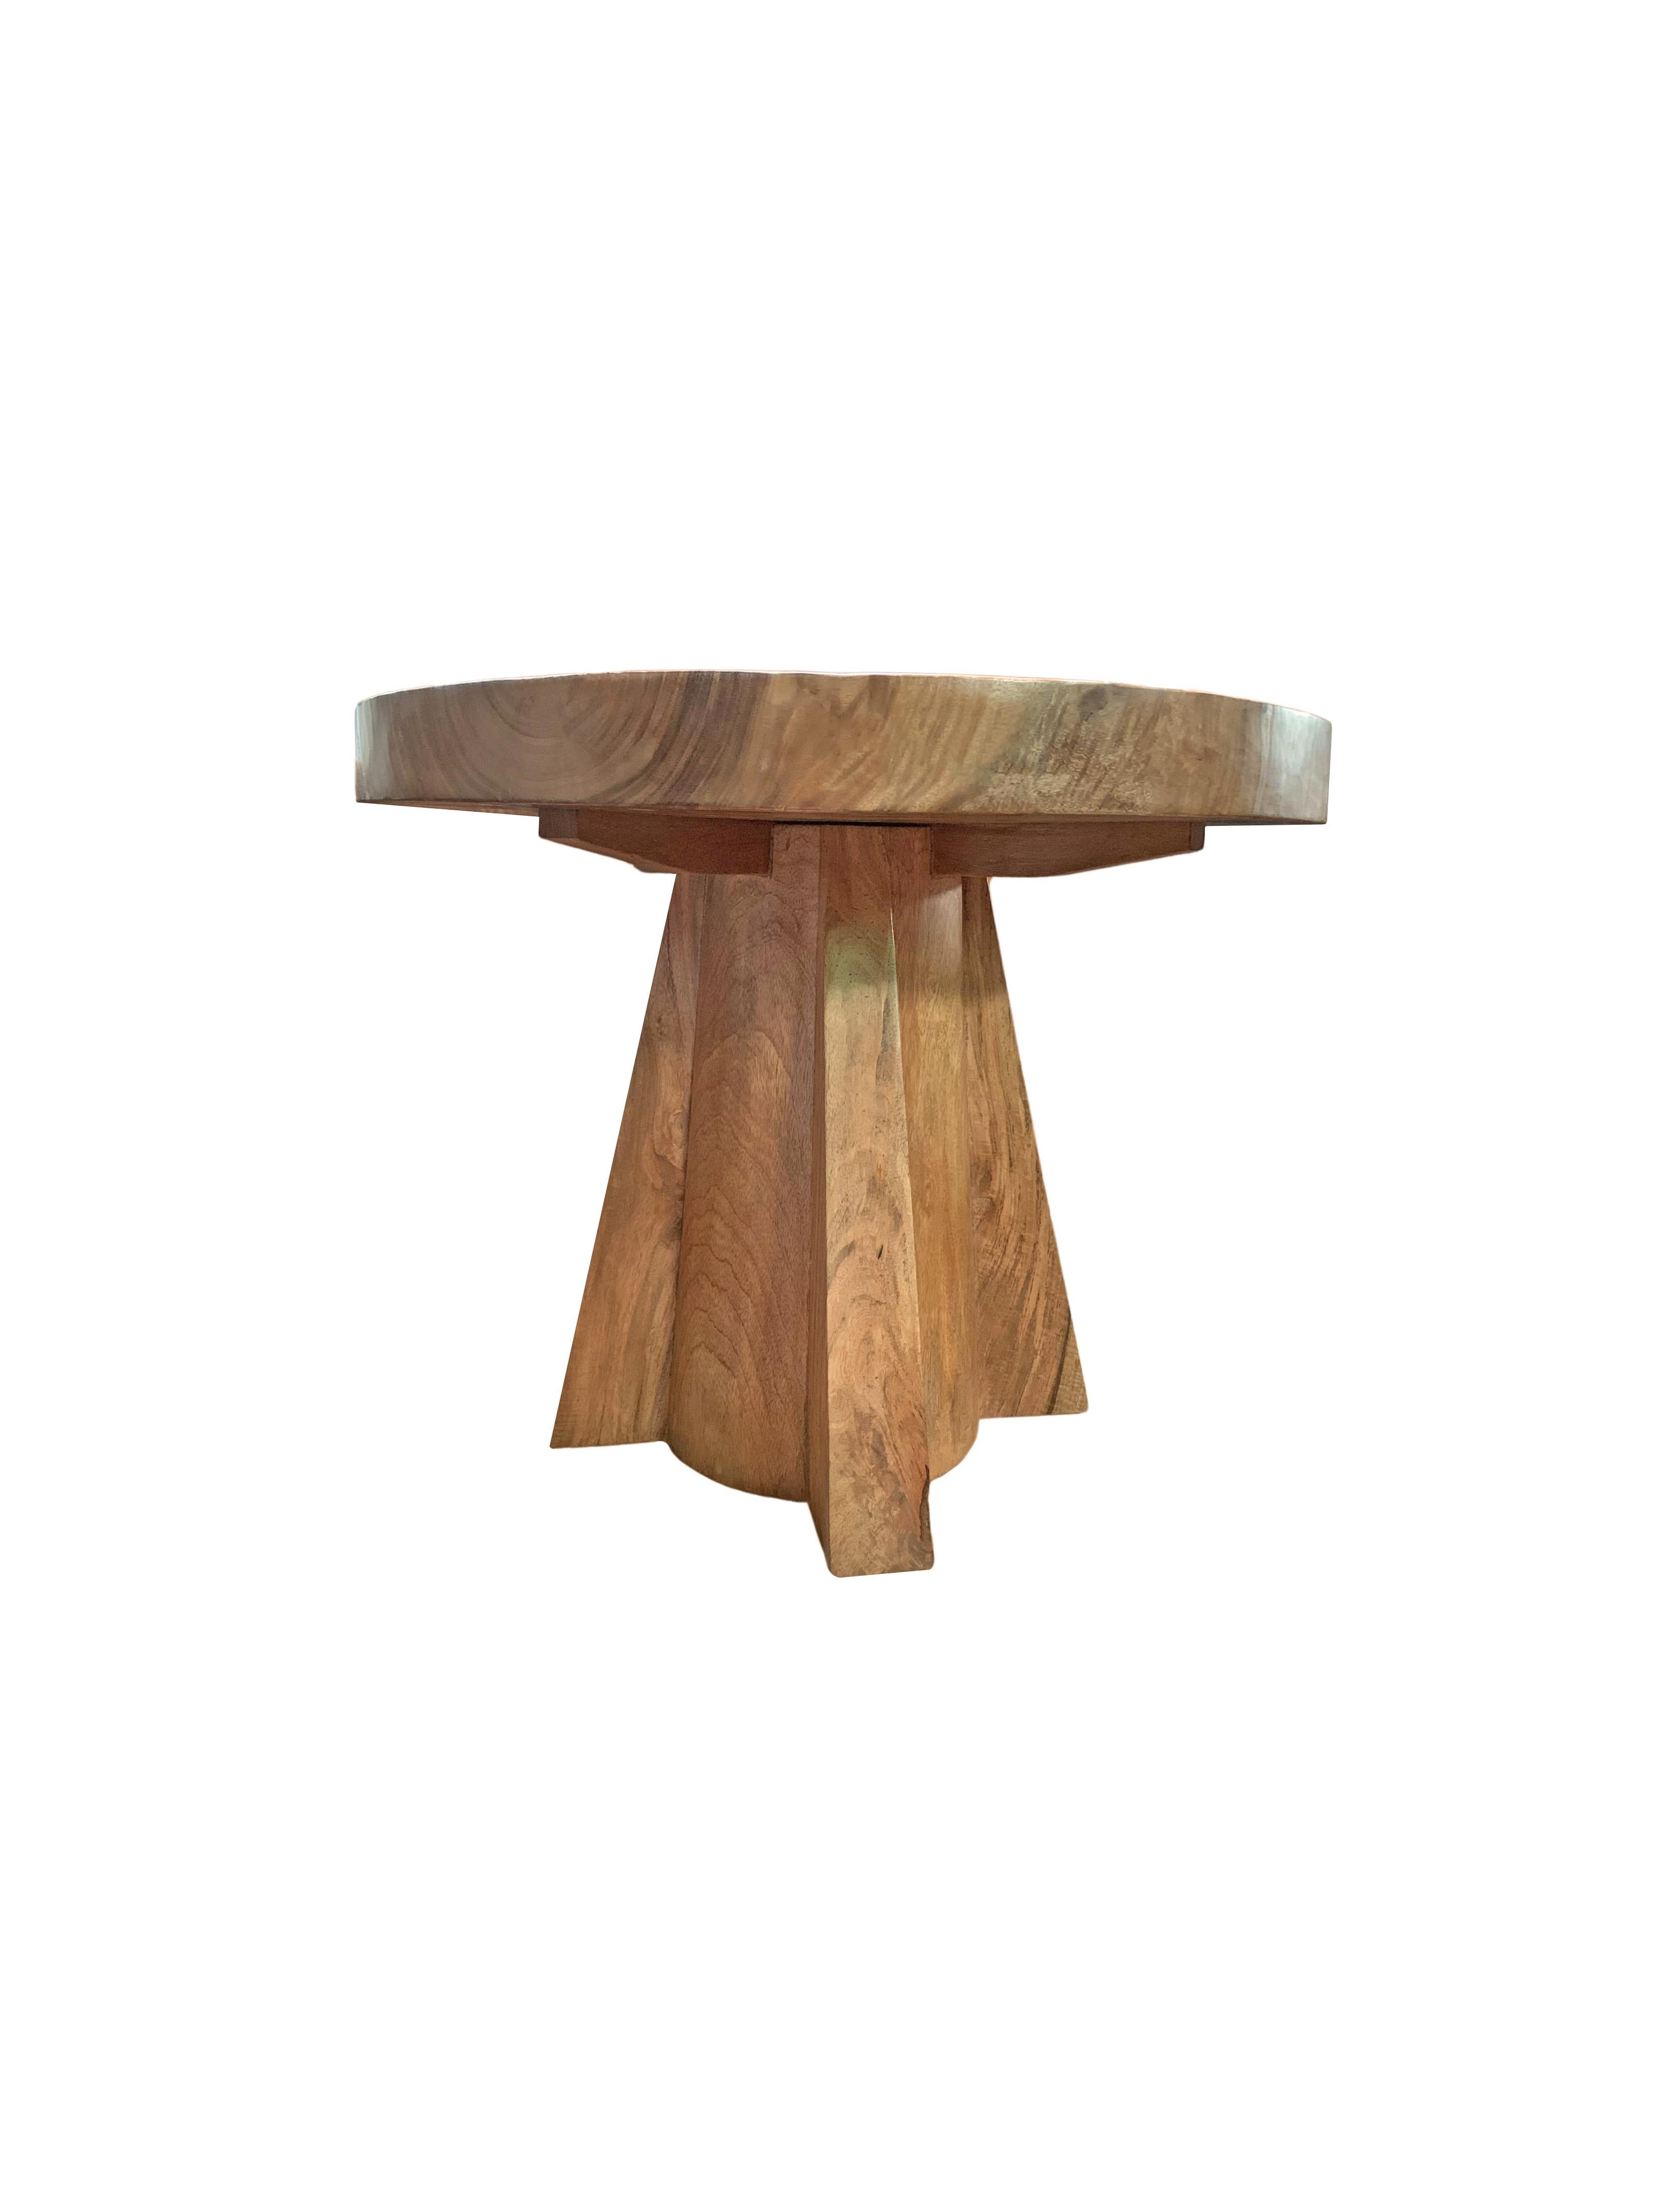 Indonesian Sculptural Suar Wood Round Table